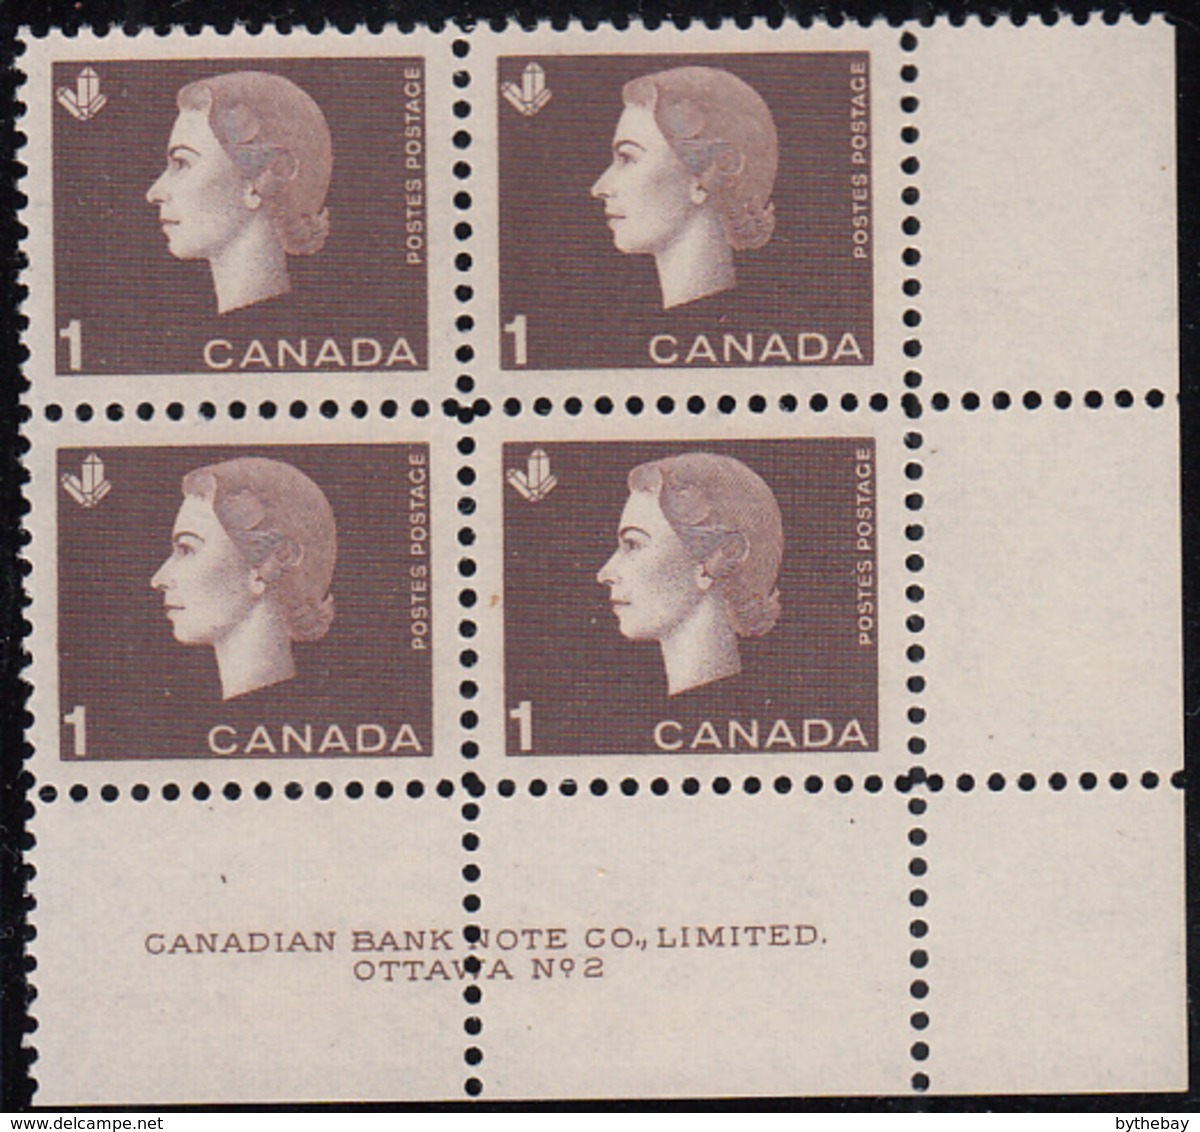 Canada 1963 MNH Sc #401 1c QEII Cameo Plate #2 LR - Plate Number & Inscriptions